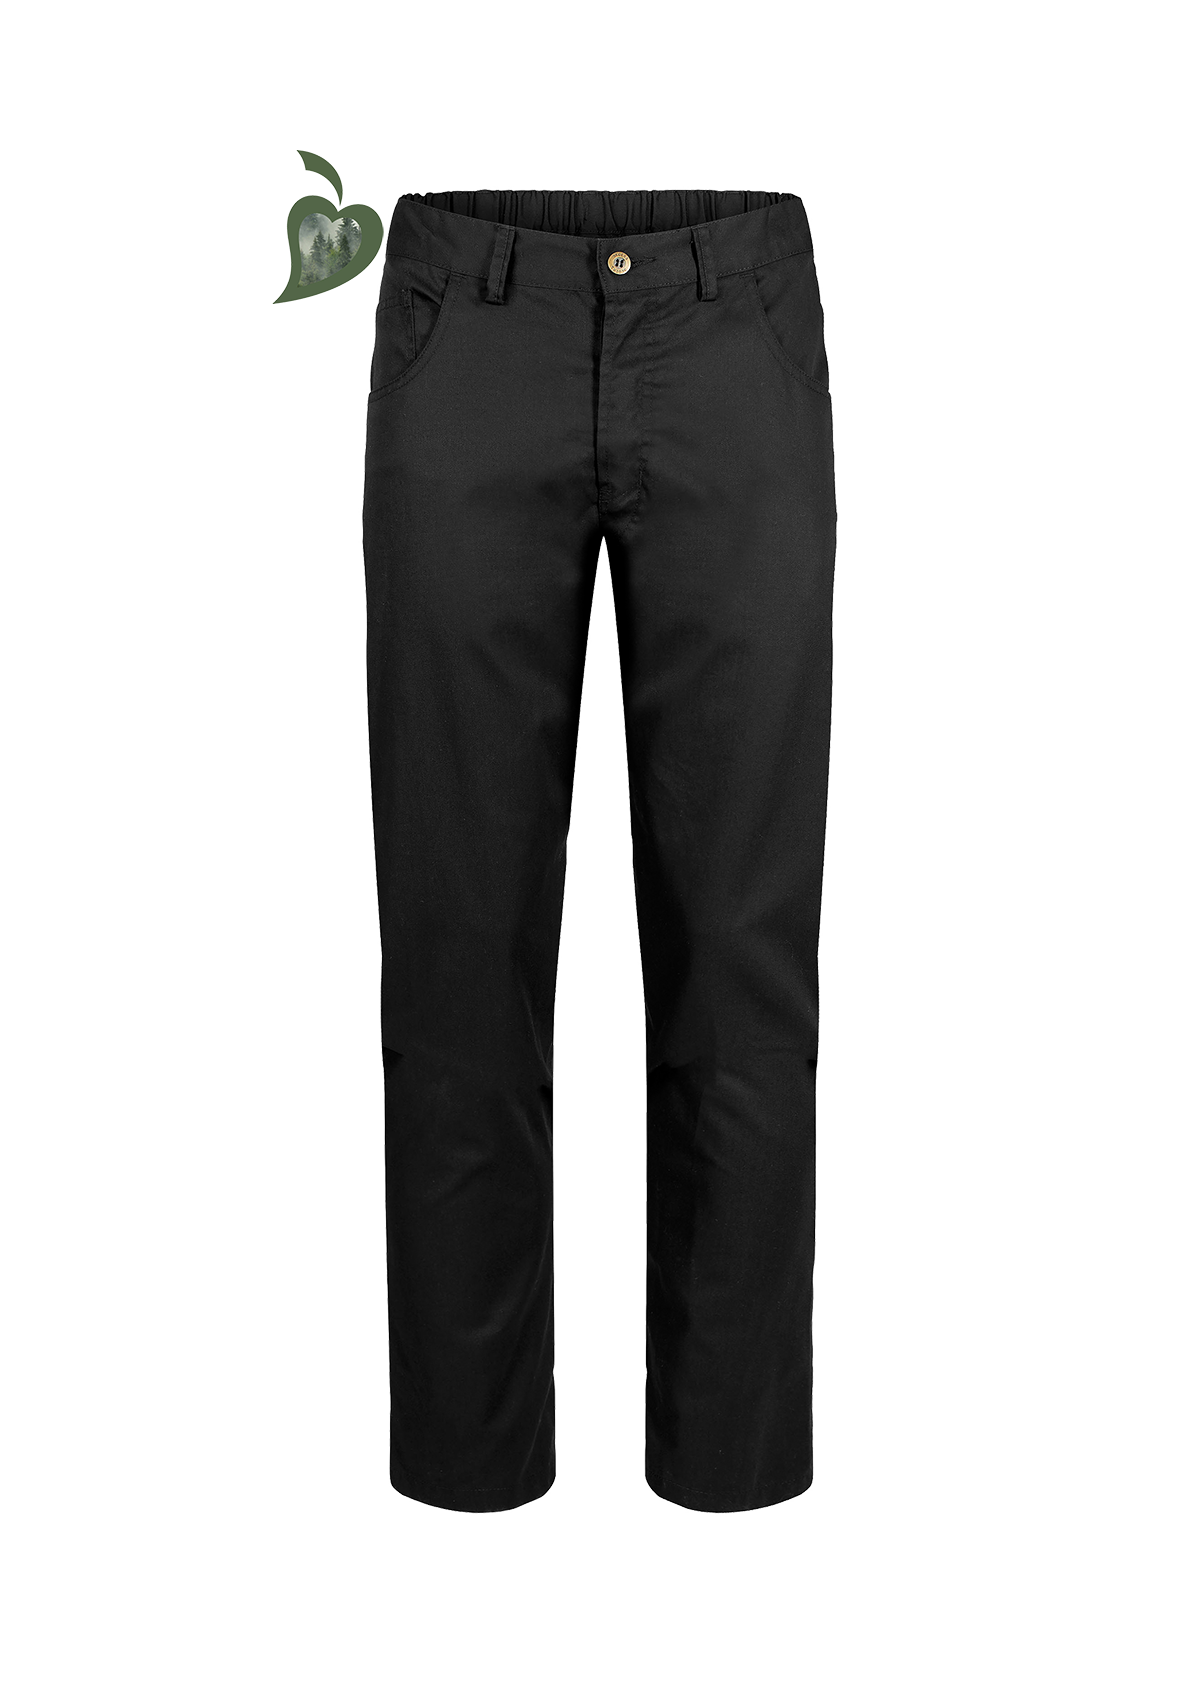 Atacac unisex Chef's trousers with stretch effect. Segers | Cookniche